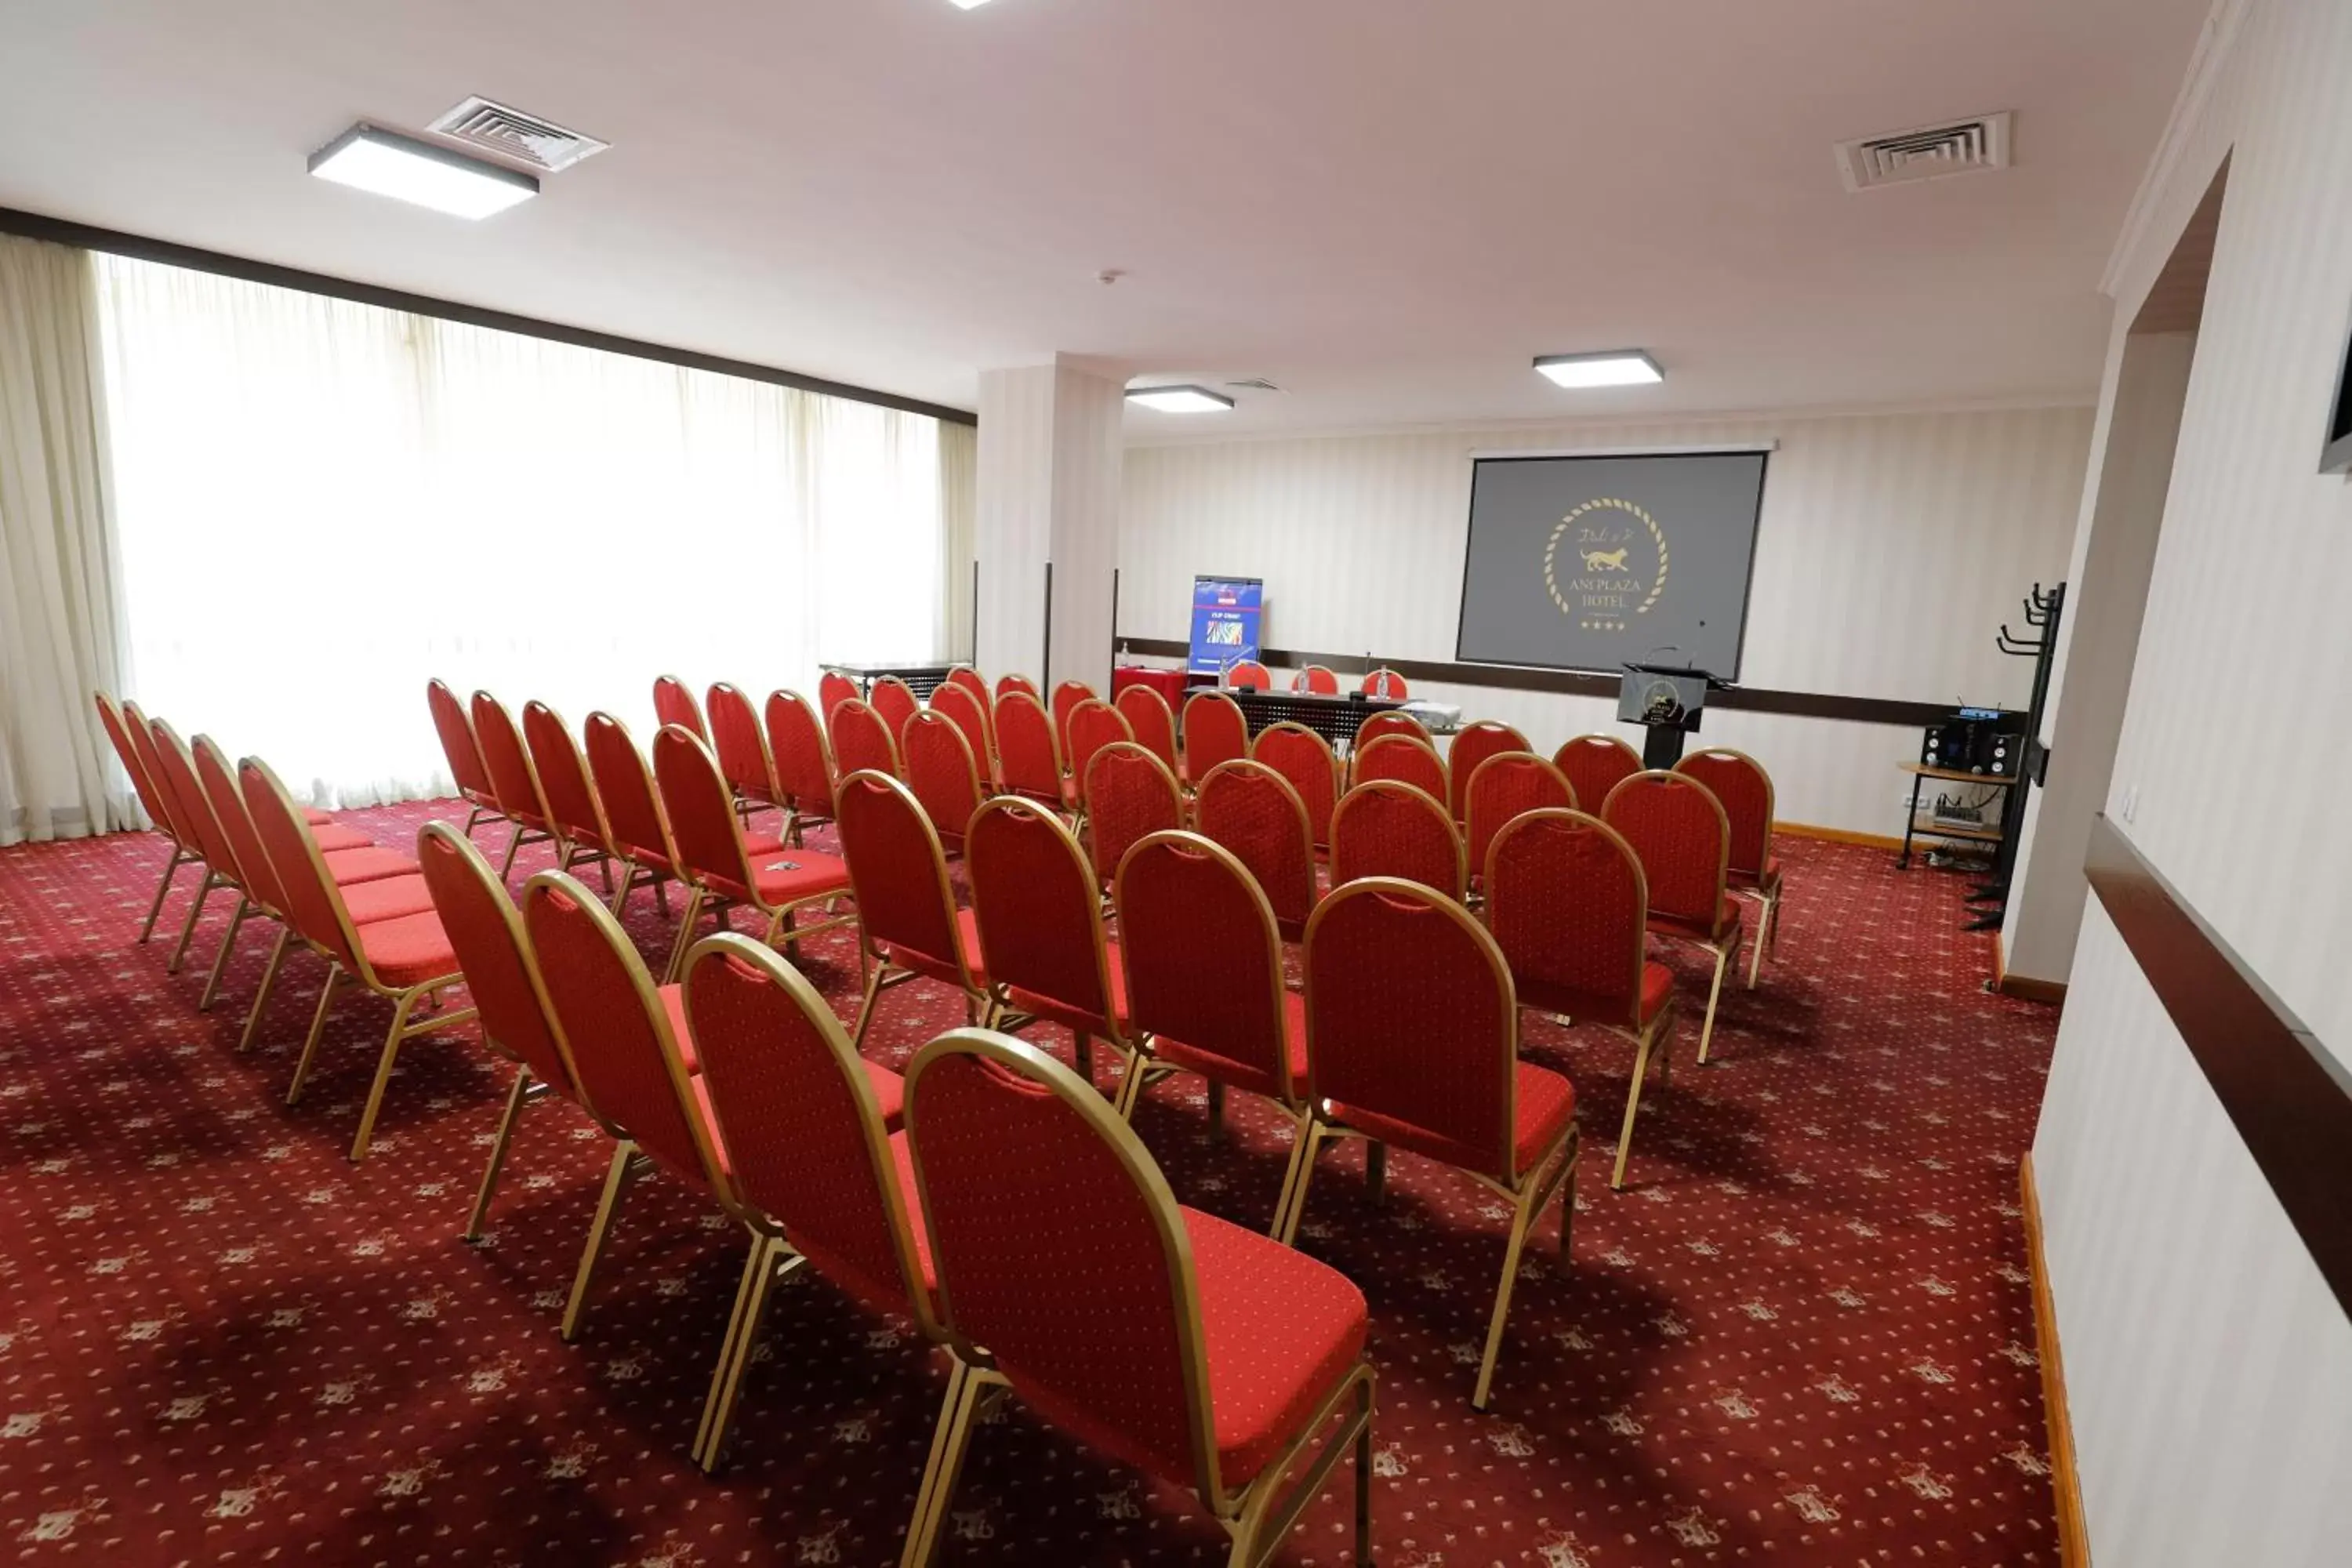 Meeting/conference room in Ani Plaza Hotel